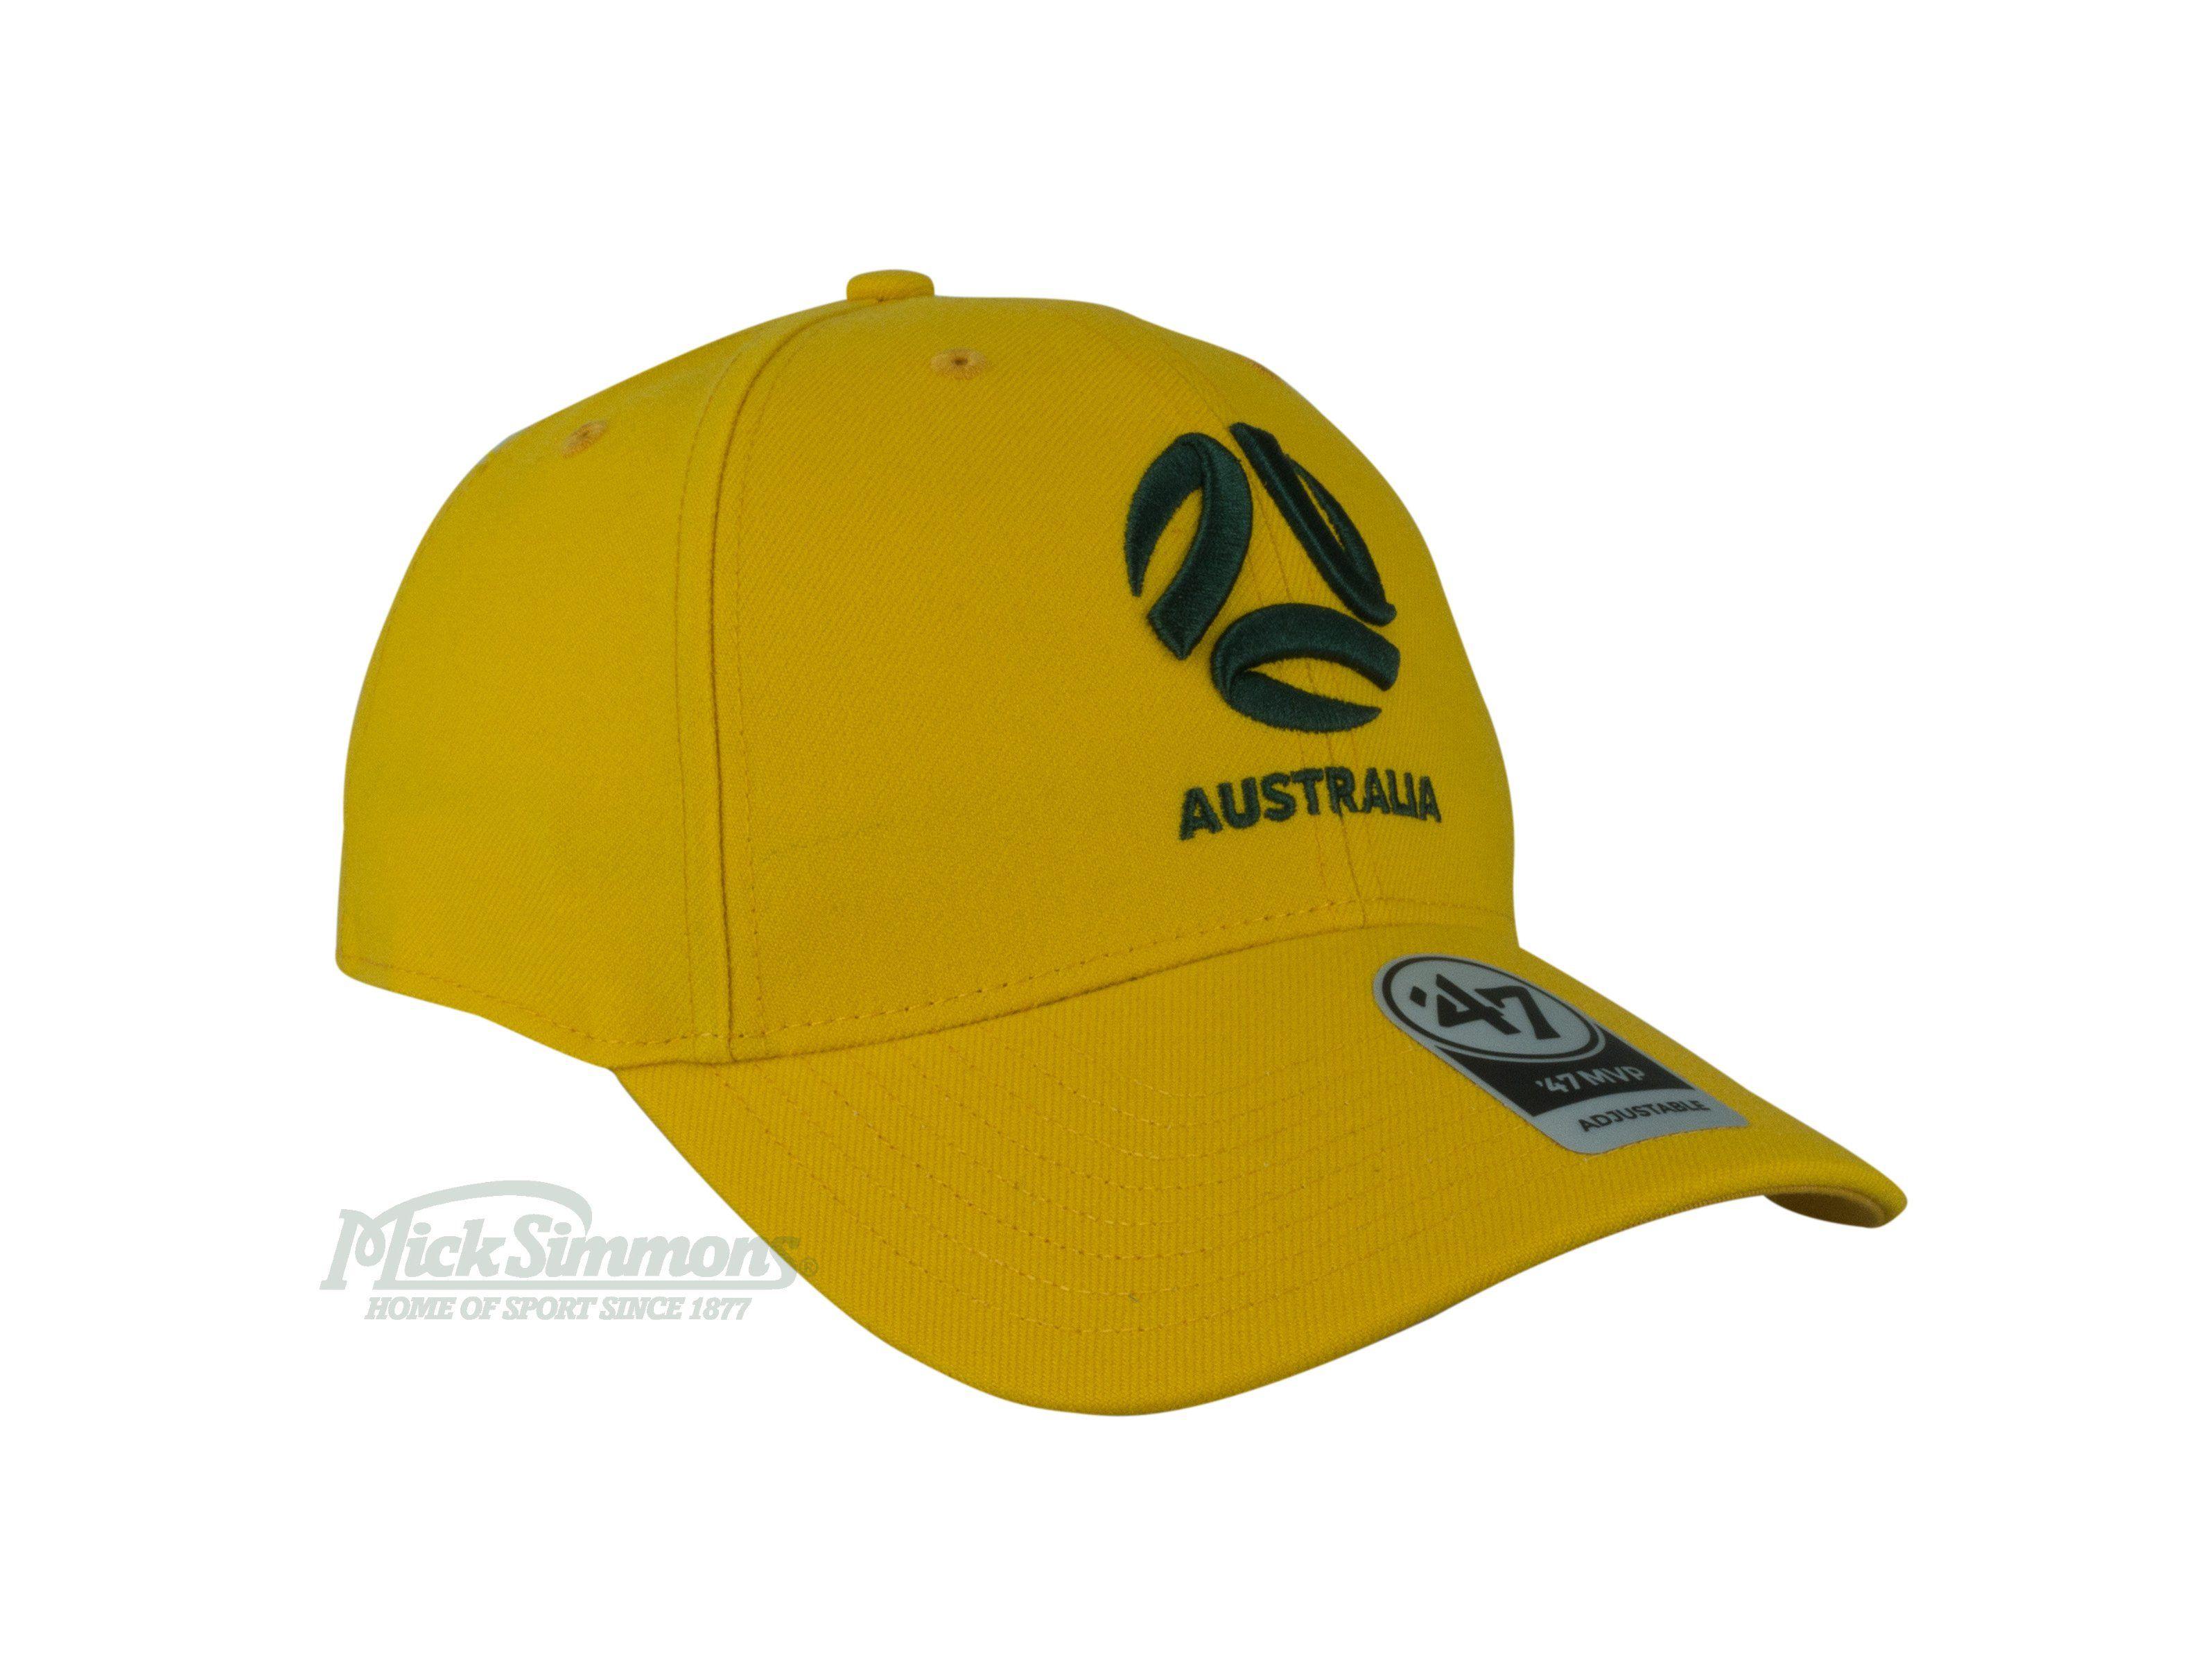 Socceroos Logo - Buy Socceroos Official Adjustable MVP Cap by 47 Brand - New FFA Logo at  Mick Simmons Sport for only $39.99